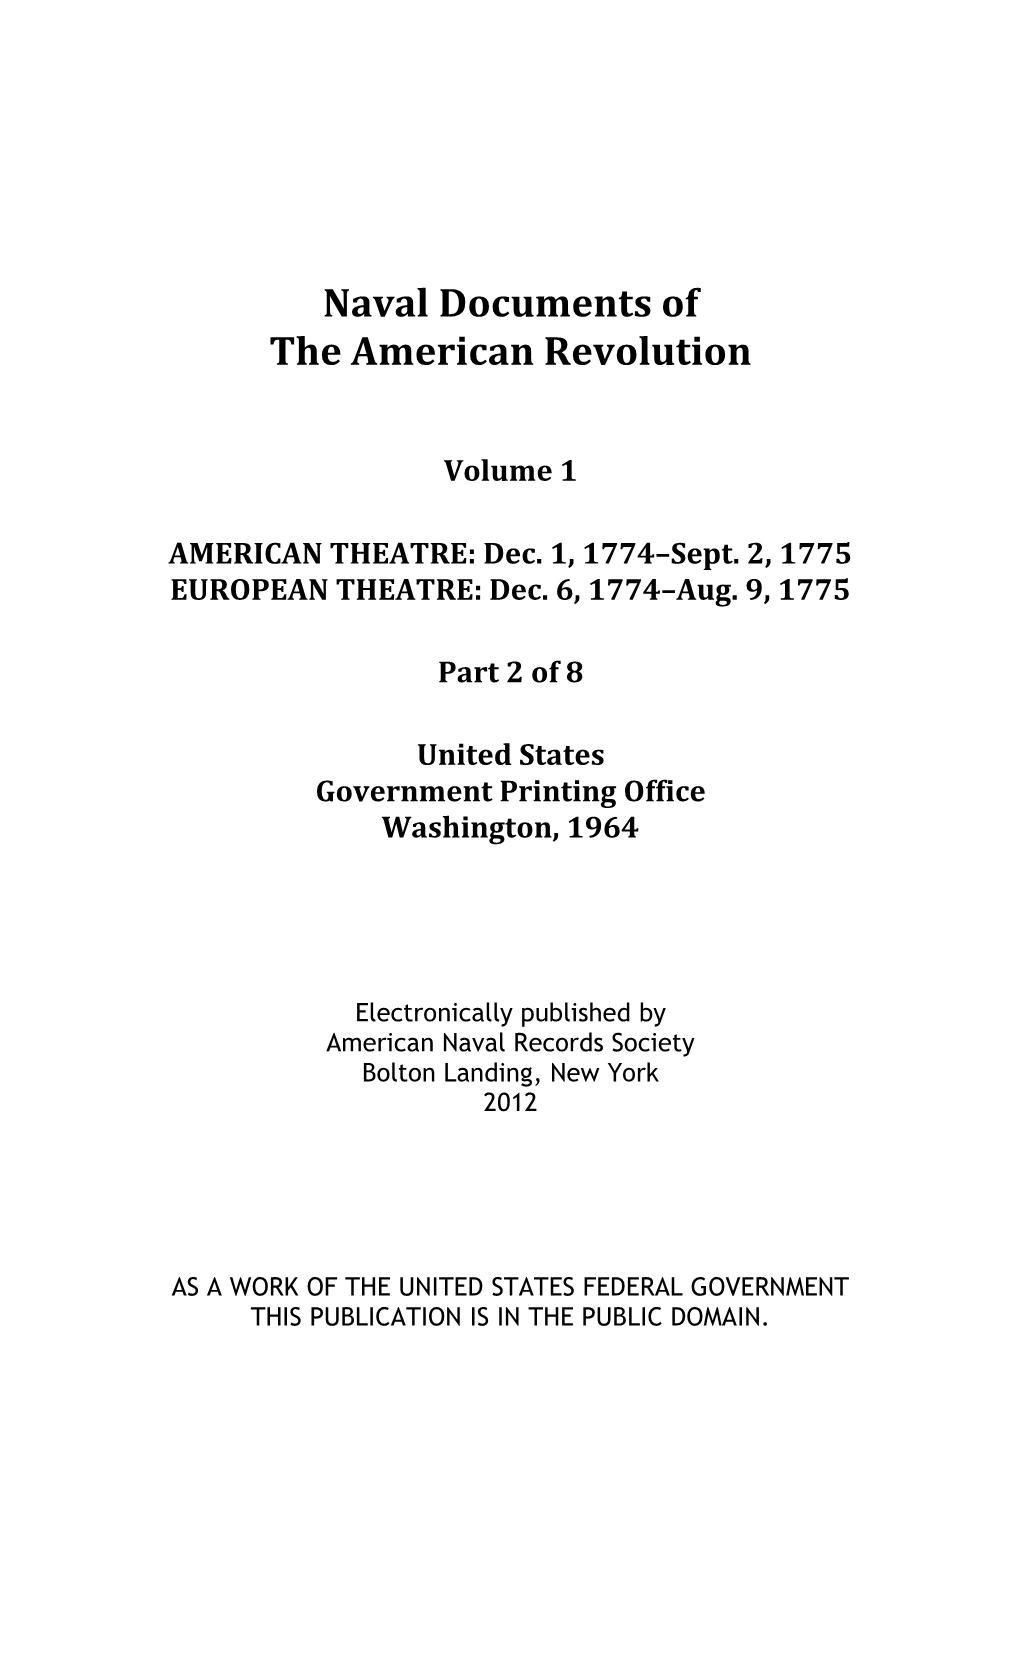 Naval Documents of the American Revolution, Volume 1, Part 2